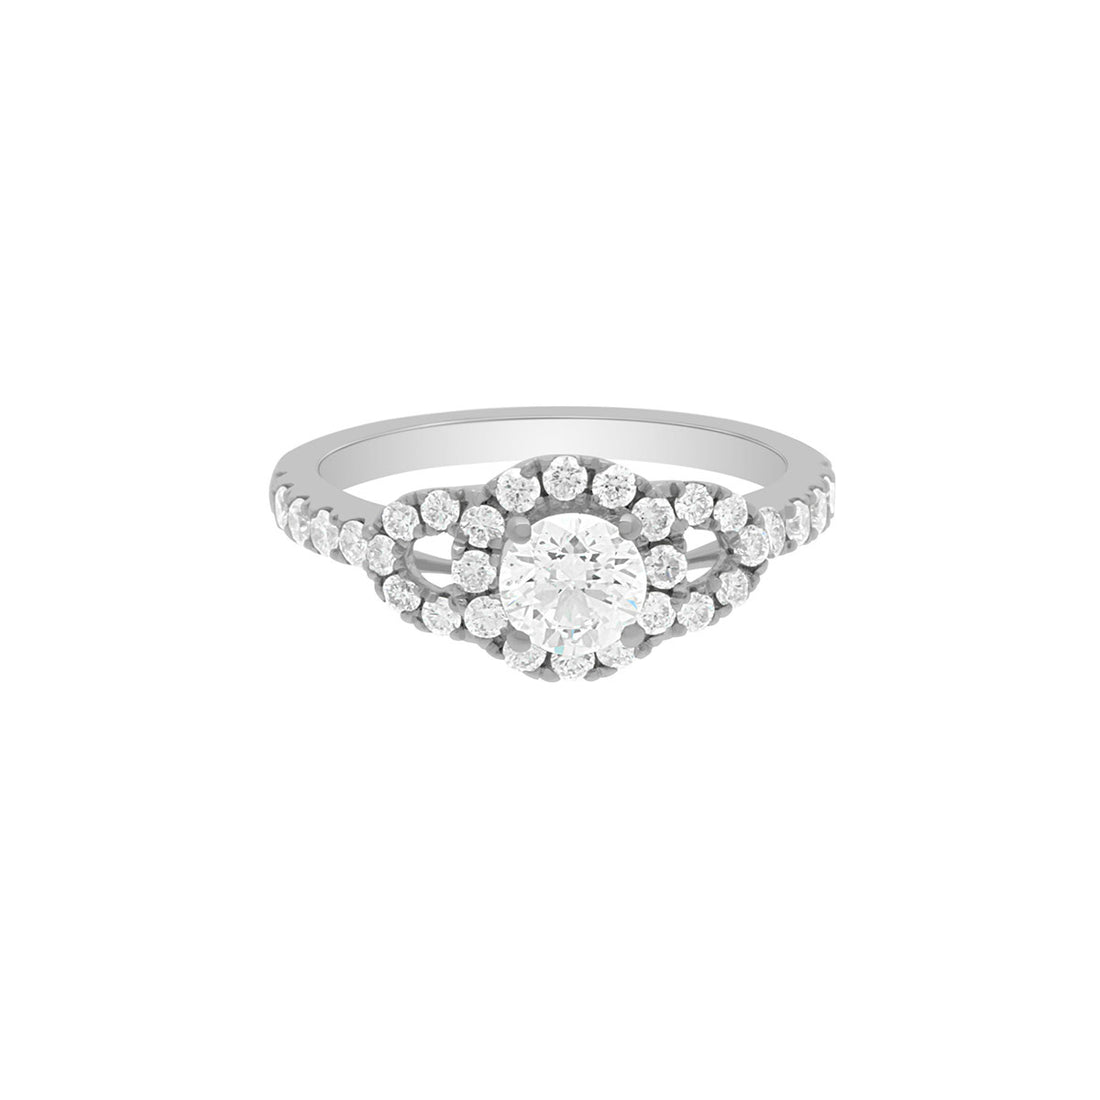 Triple Halo Engagement Ring in white gold